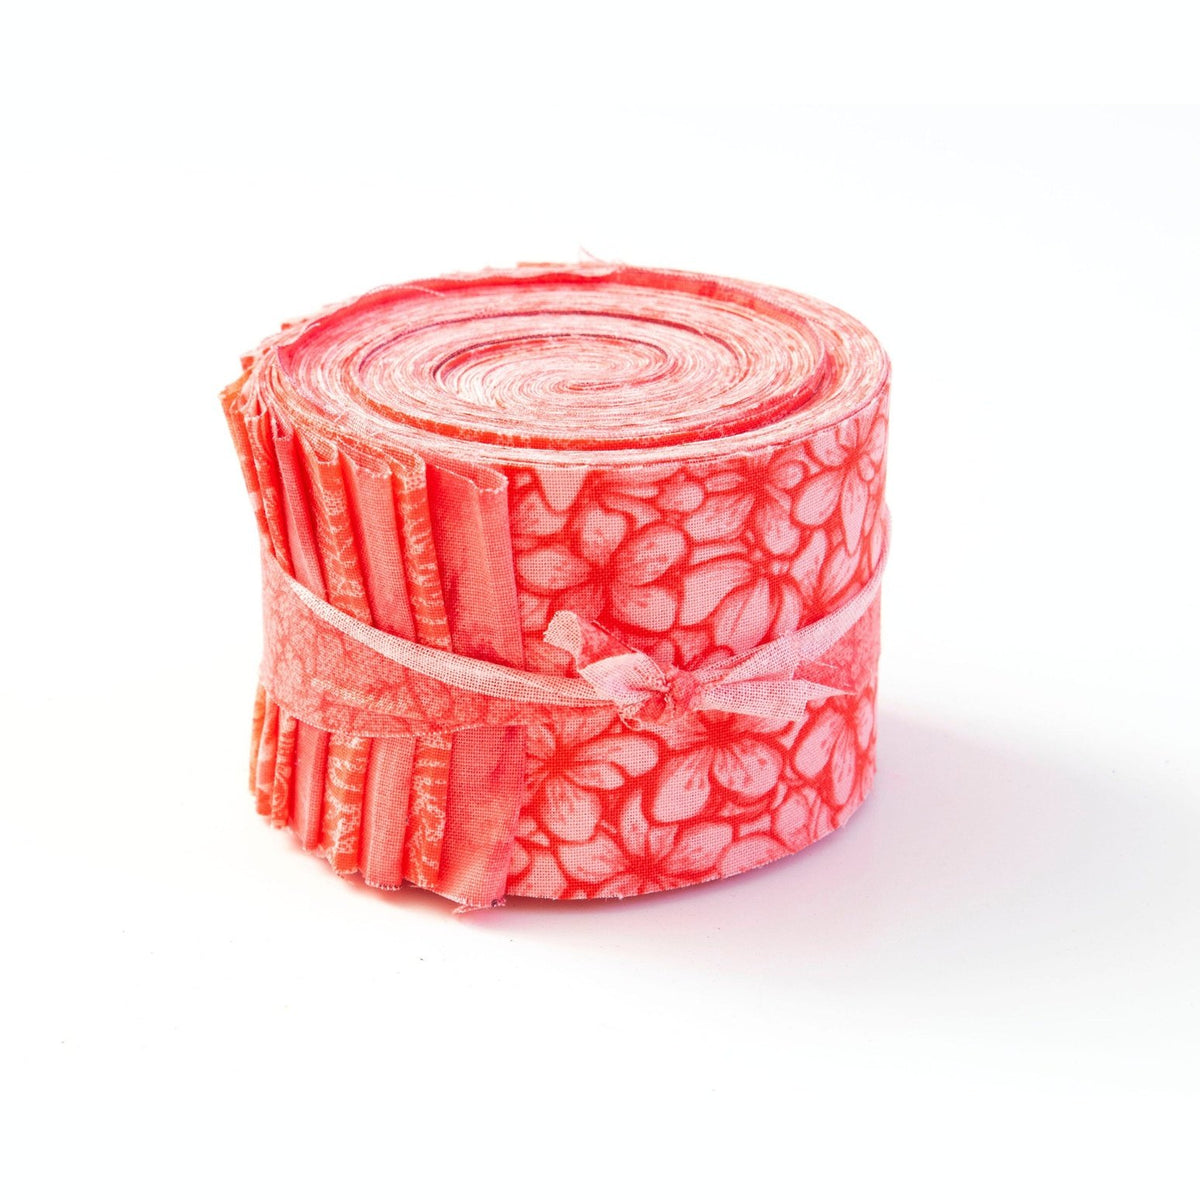 Tropical Coral Harmony Strip Roll 2.5 inch pre-cut 100% cotton fabric quilting strips - 20 strips